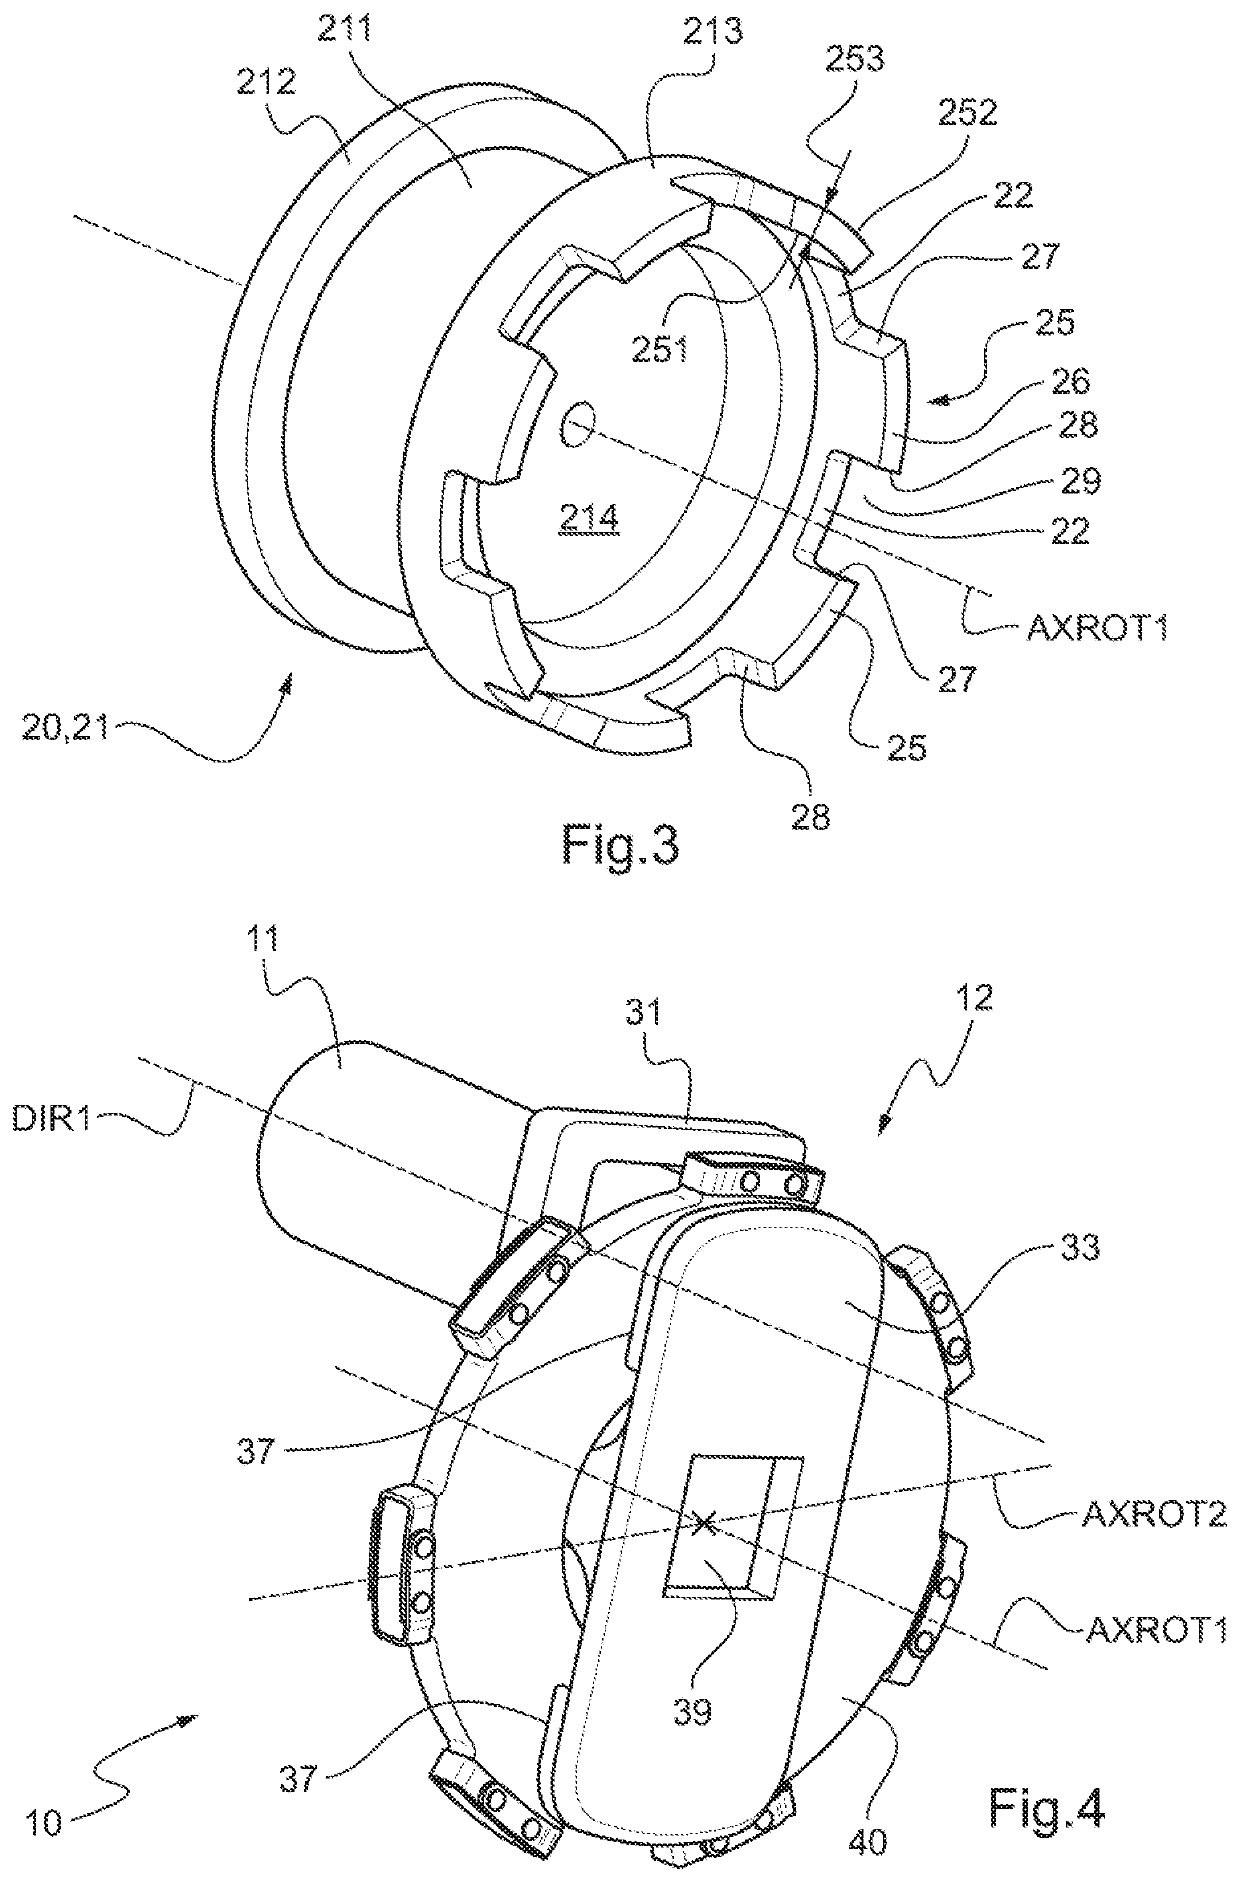 Caliper braking system for aircraft landing gear having a plurality of brake disk clamping zones